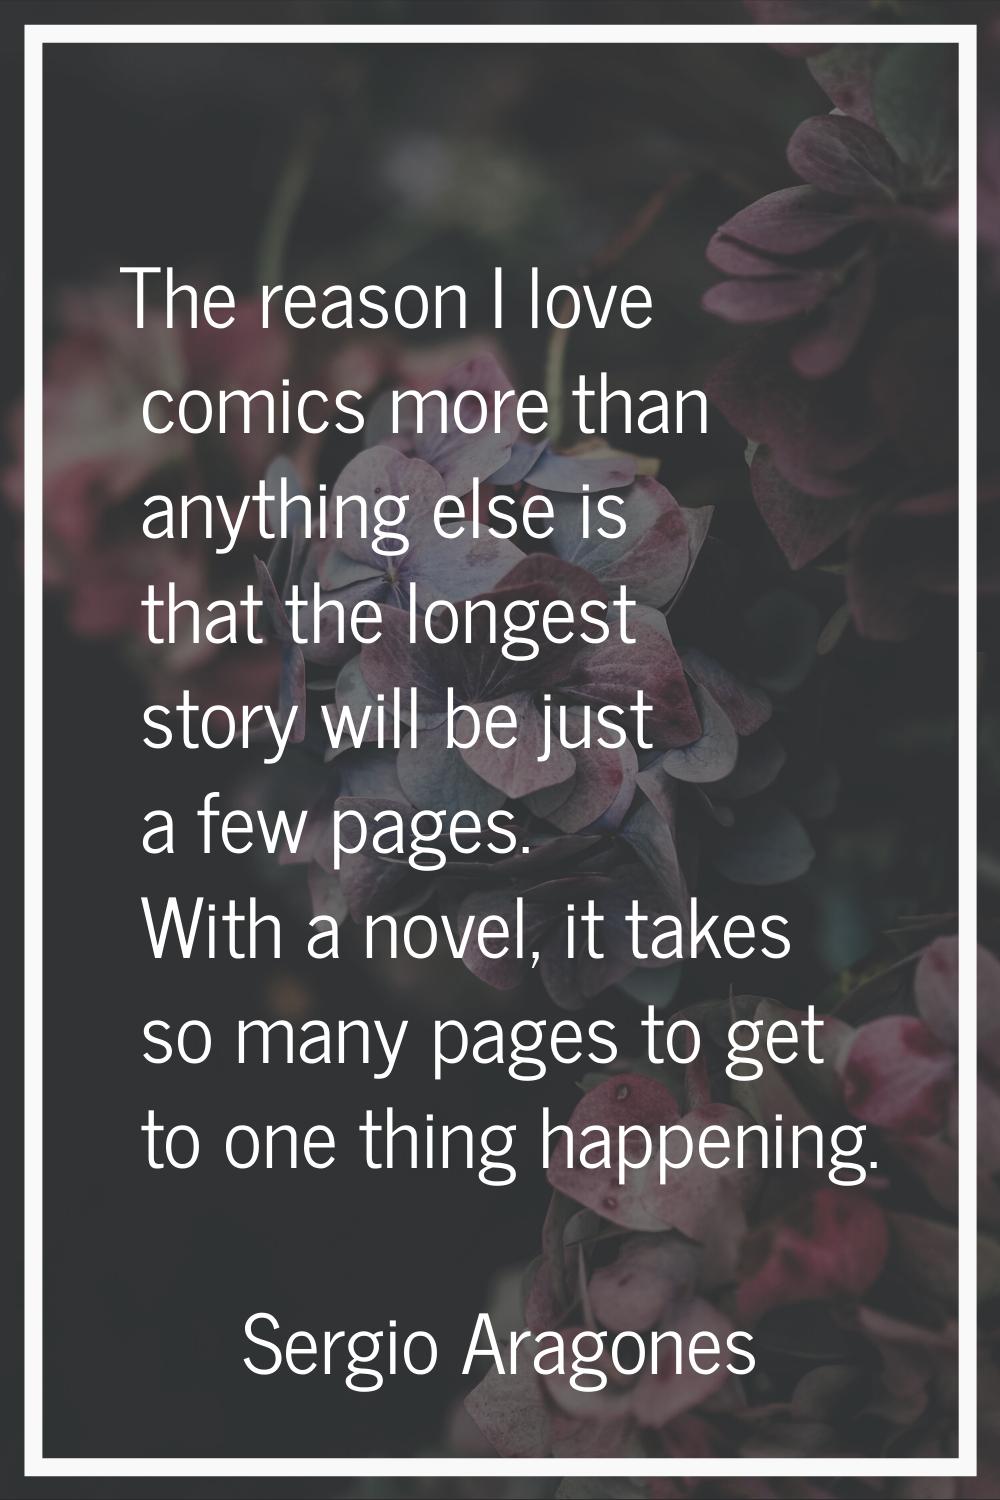 The reason I love comics more than anything else is that the longest story will be just a few pages